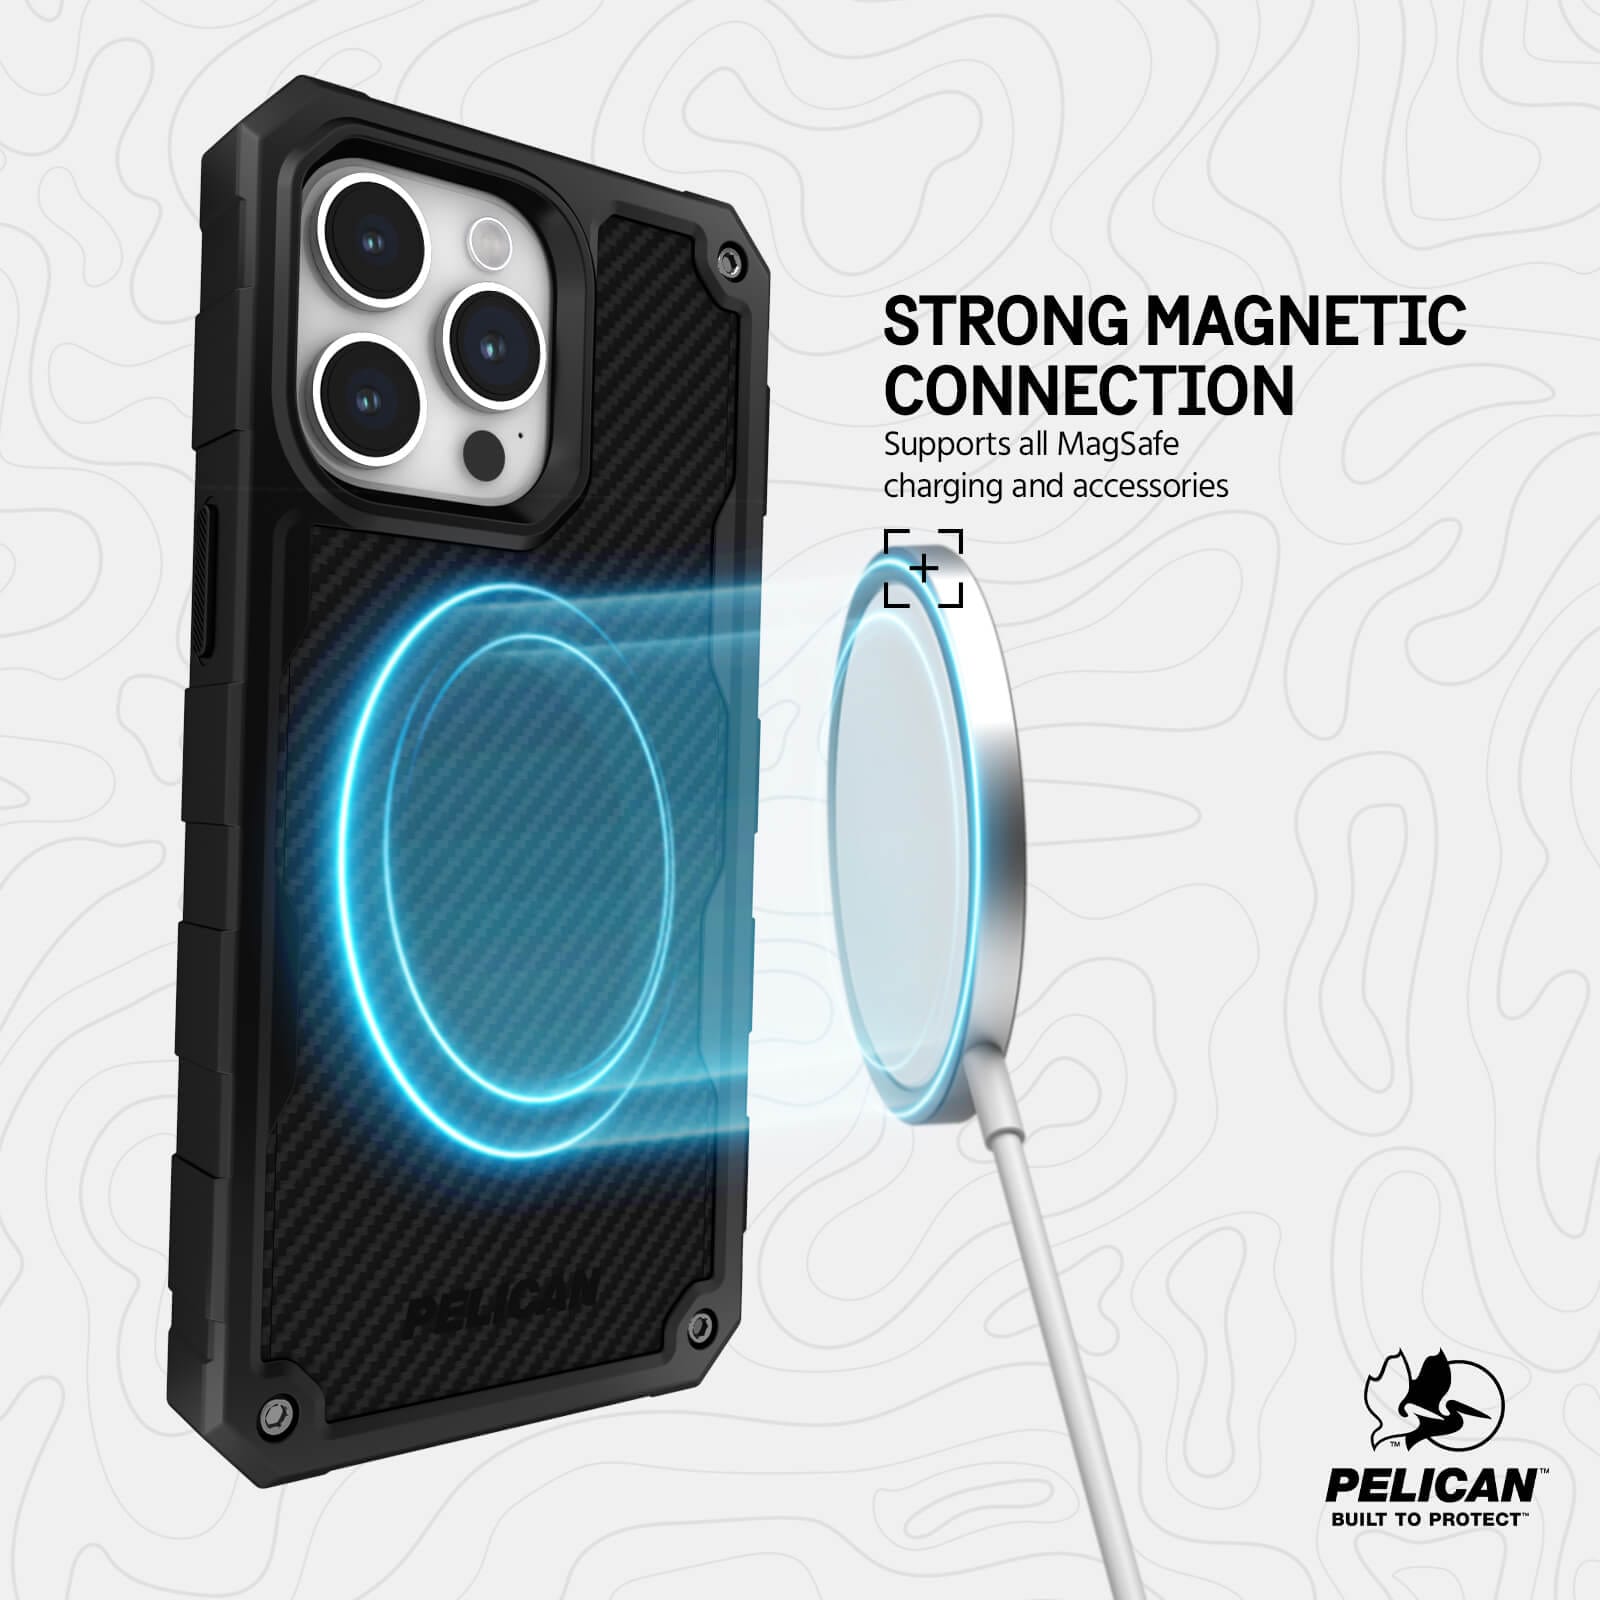 STRONG MAGNETIC CONNECTION. SUPPORTS ALL MAGSAFE CHARGING AND ACCESSORIES.